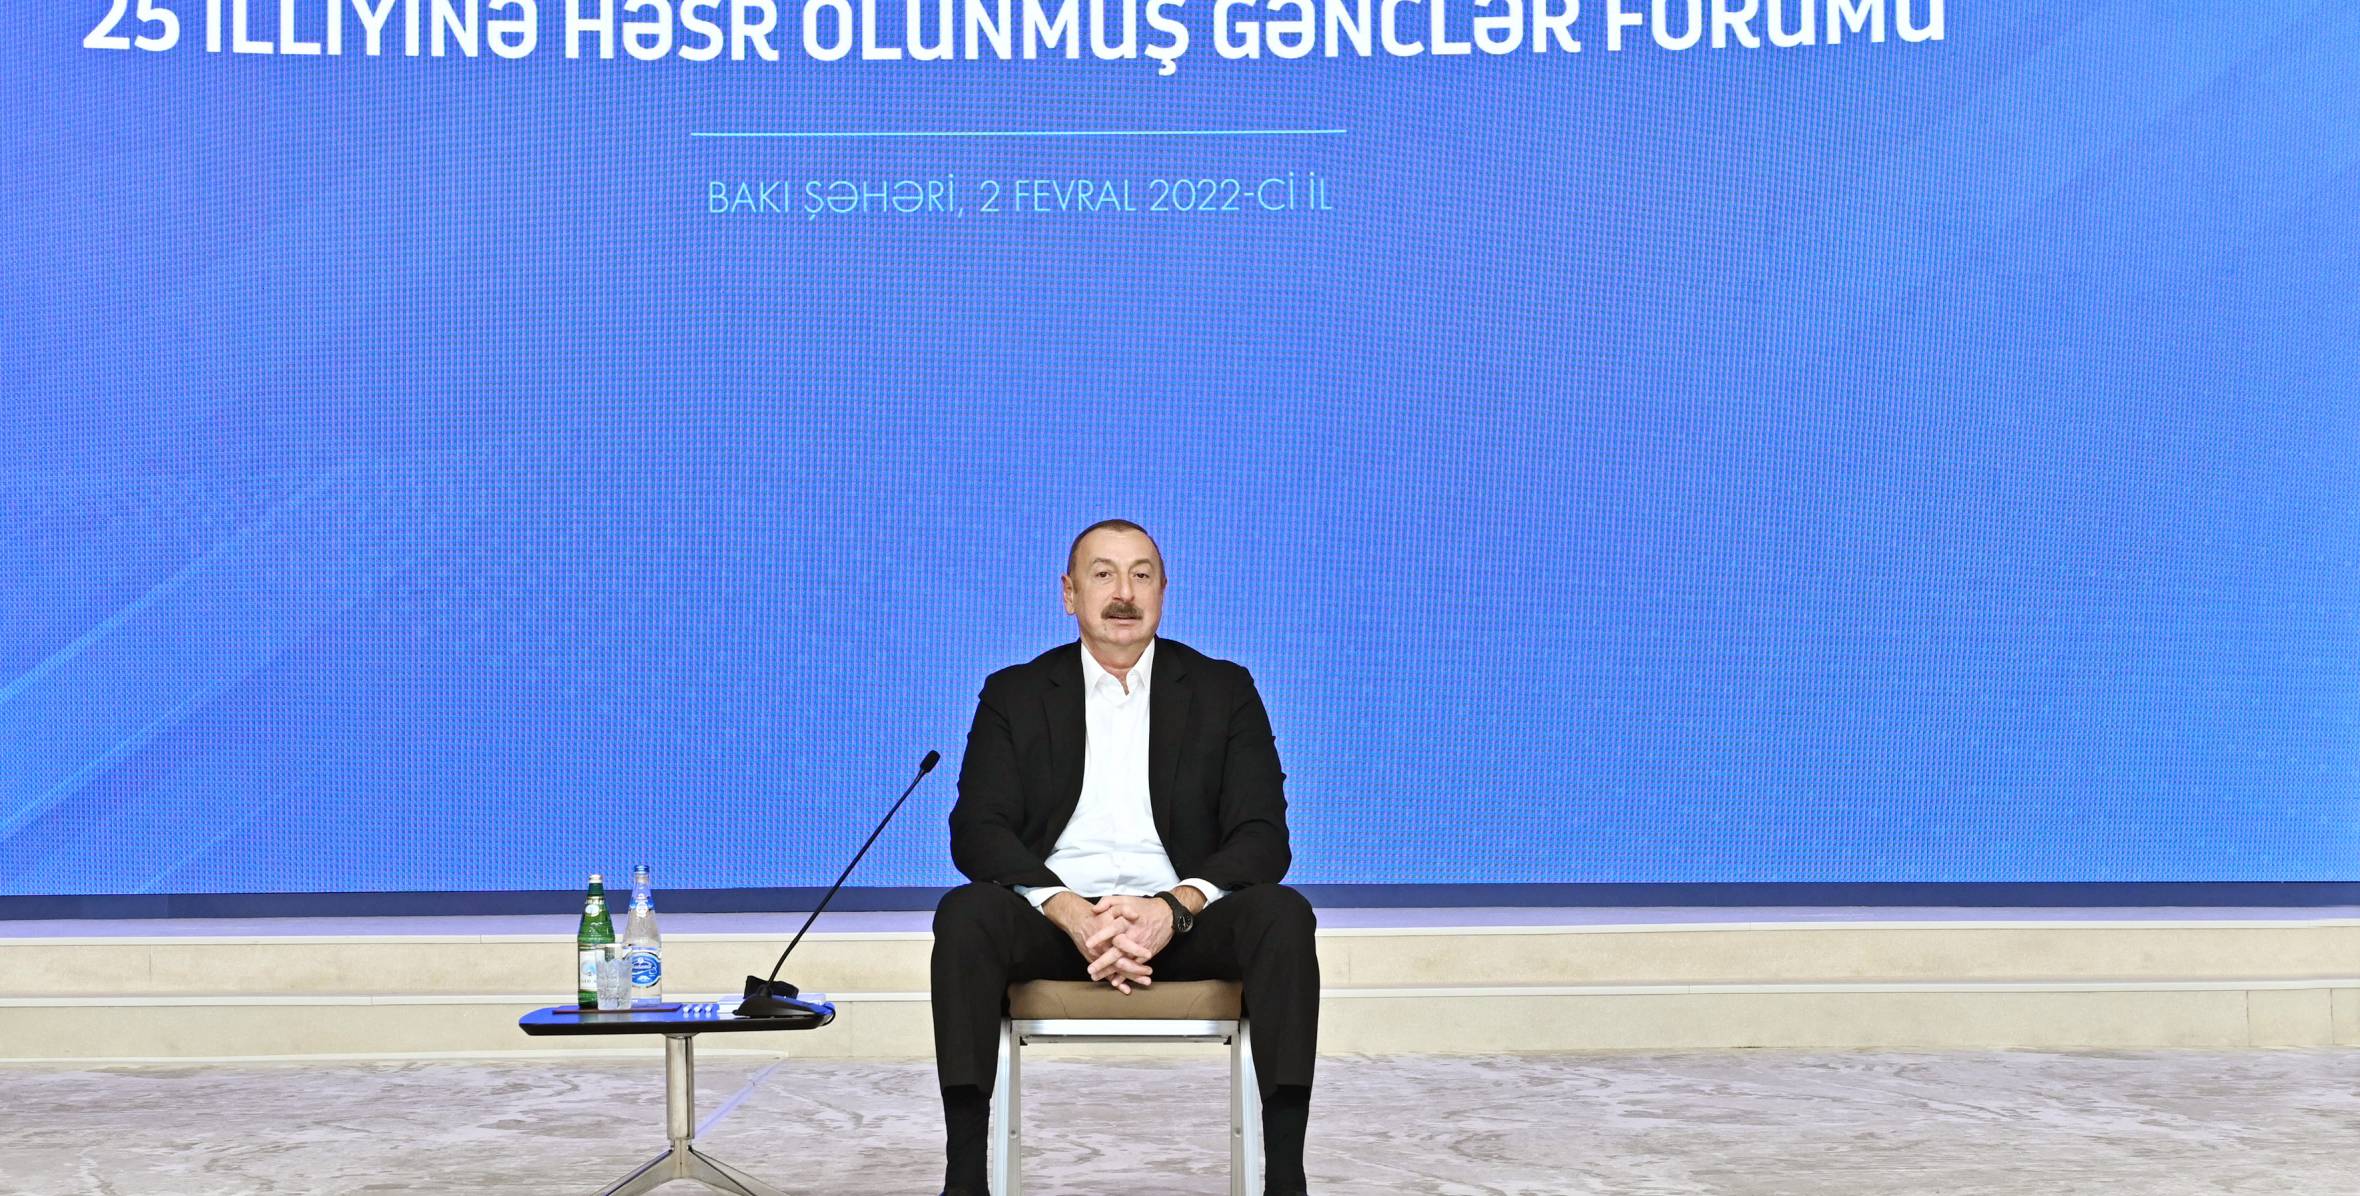 Ilham Aliyev attended Youth Forum on 25th anniversary of Day of Azerbaijani Youth